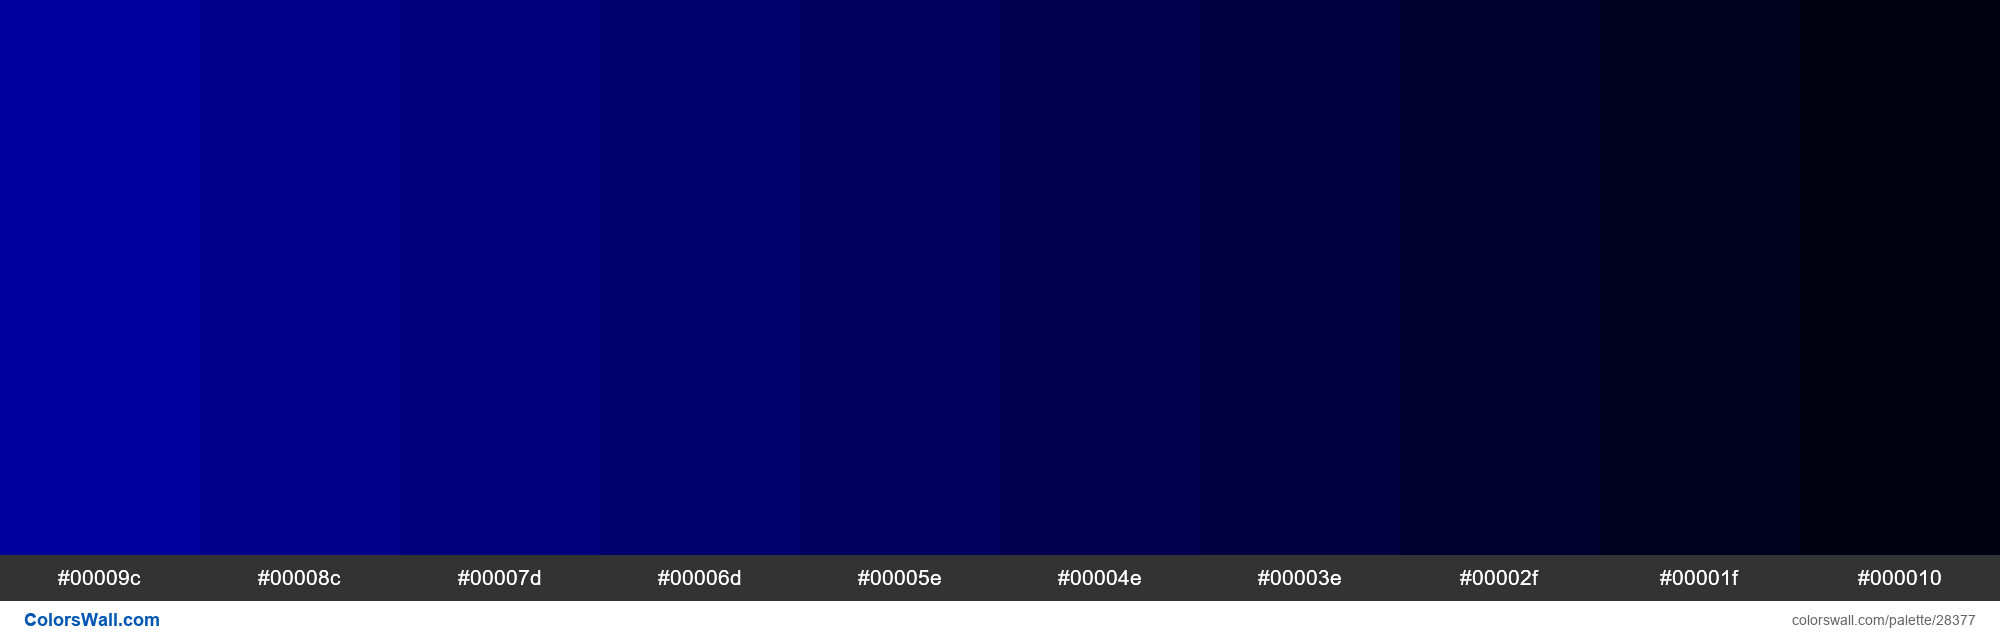 colorswall on X: Shades of New Midnight Blue color #00009C hex #00009c,  #00008c, #00007d, #00006d, #00005e, #00004e, #00003e, #00002f, #00001f,  #000010 #colors #palette   /  X